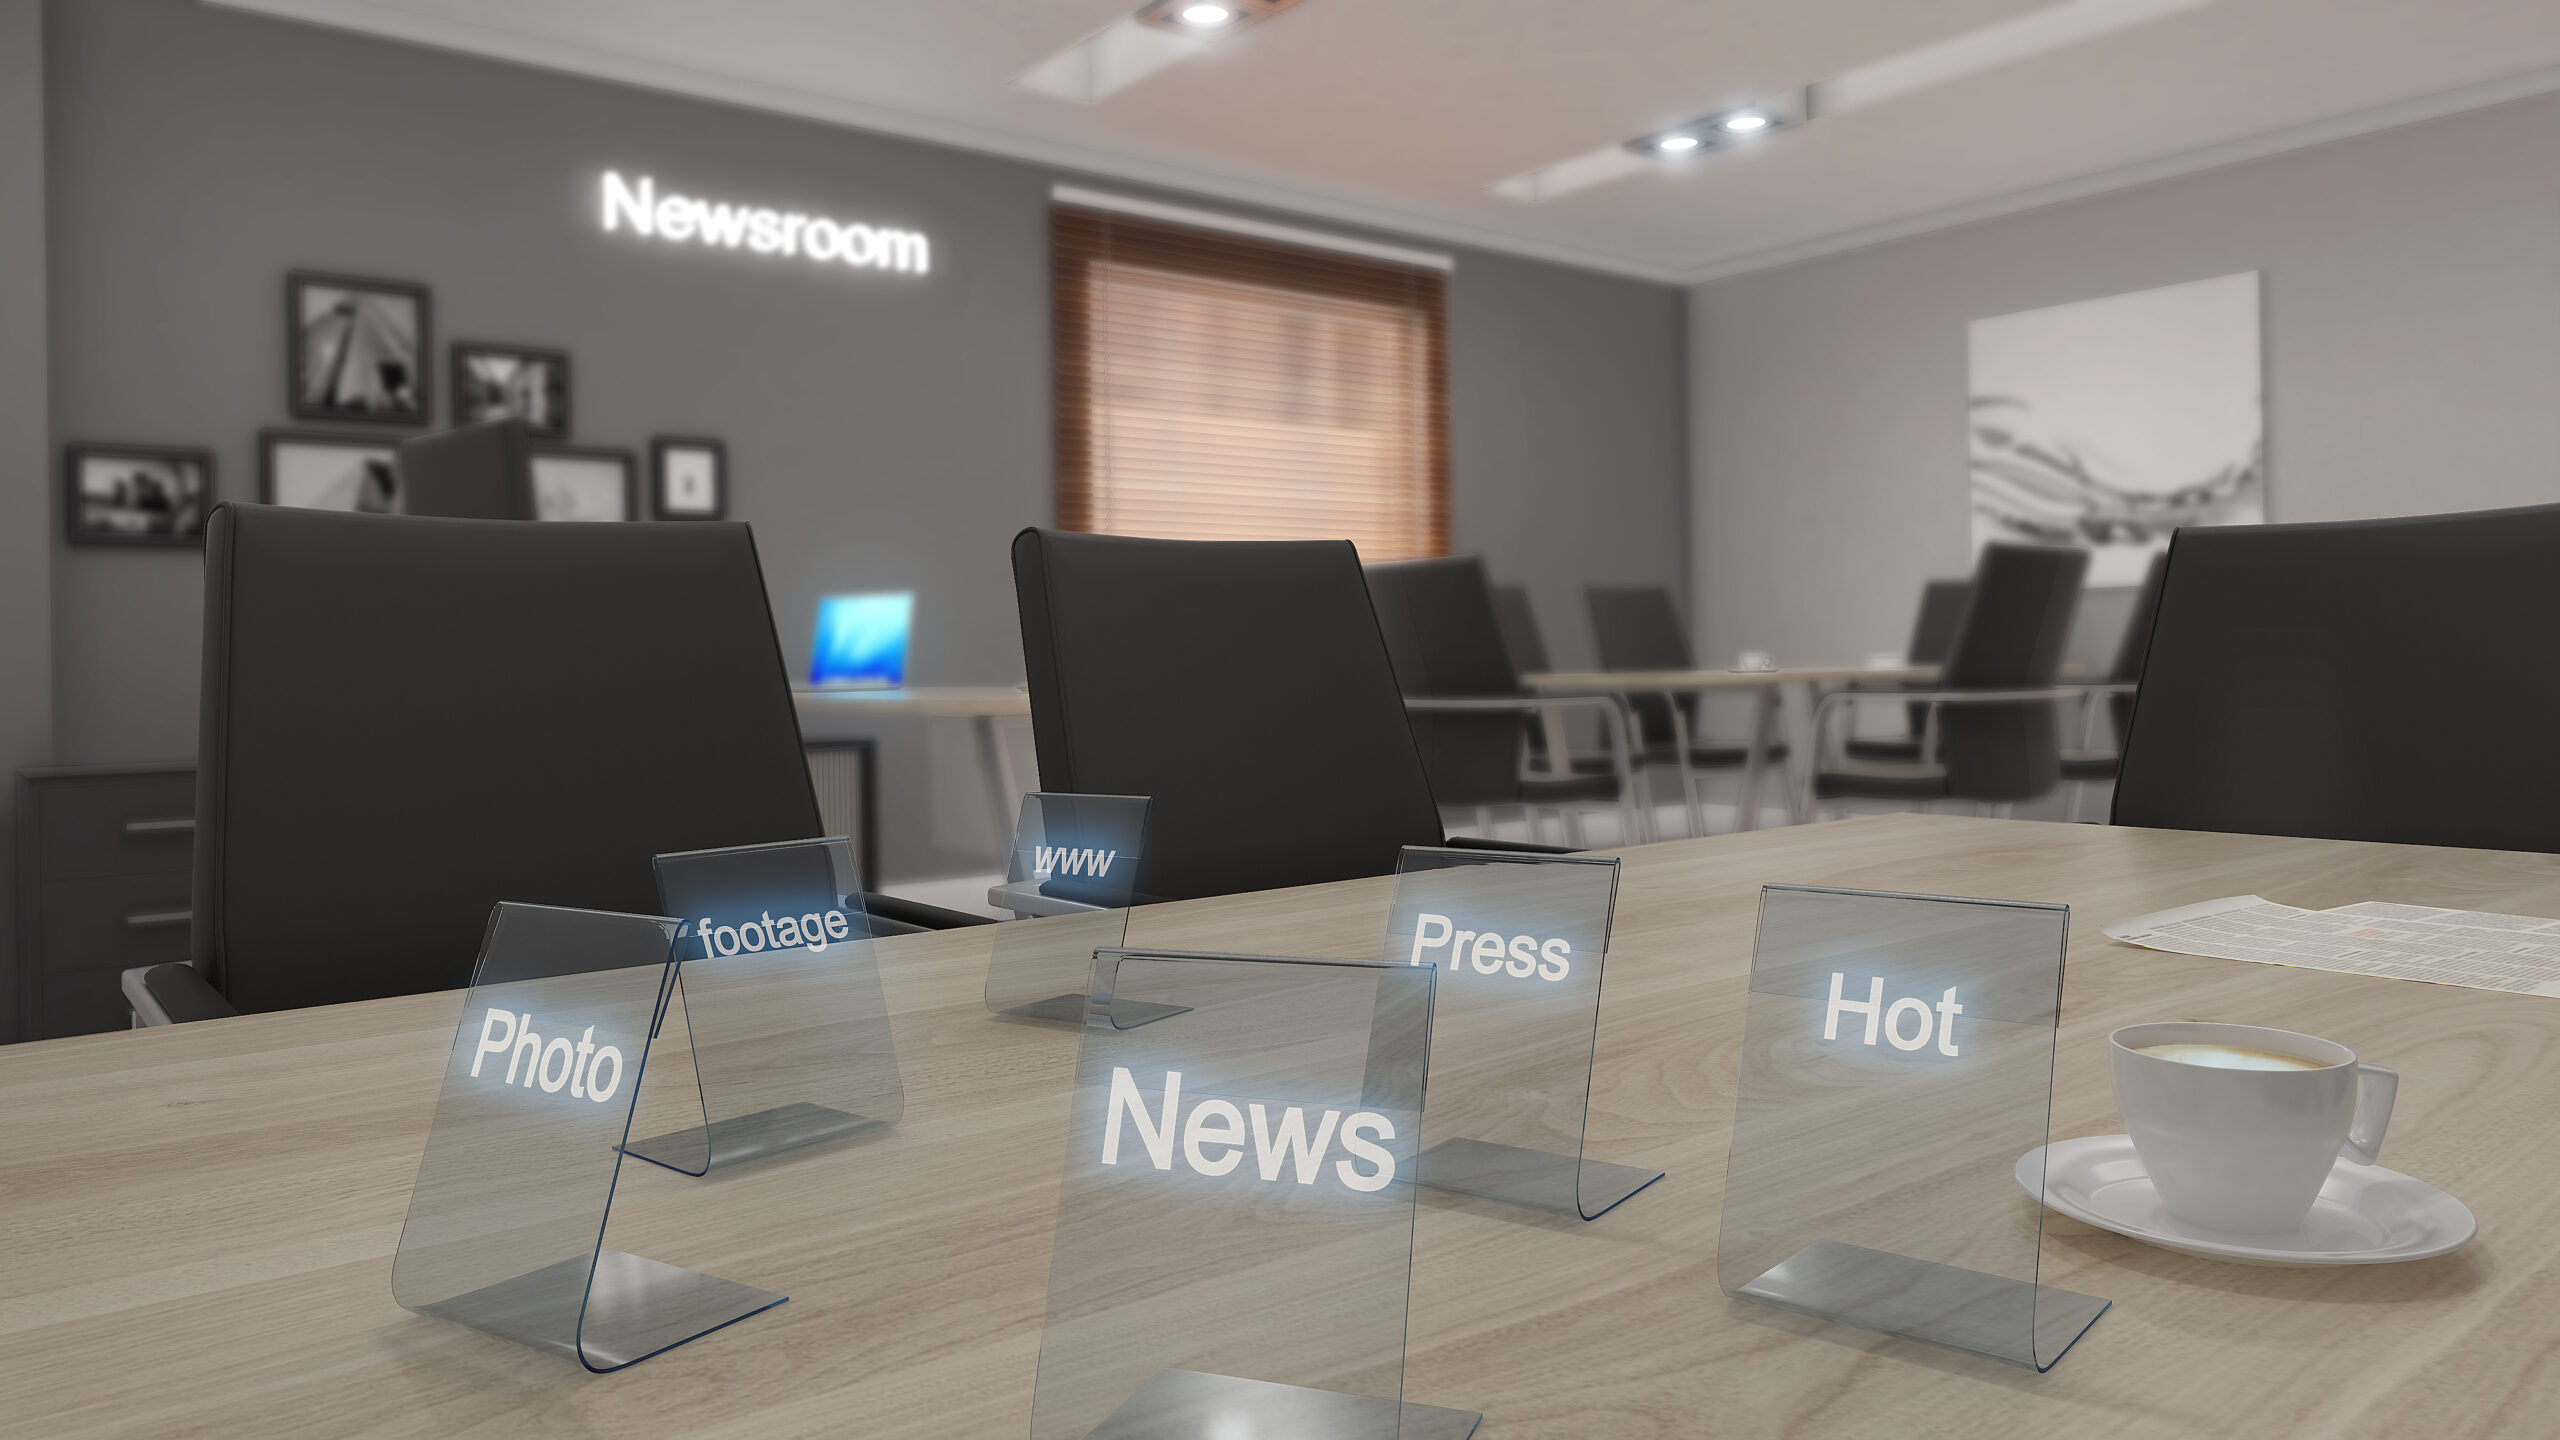 Oled displays stand on a table in the newsroom - 3d illustration